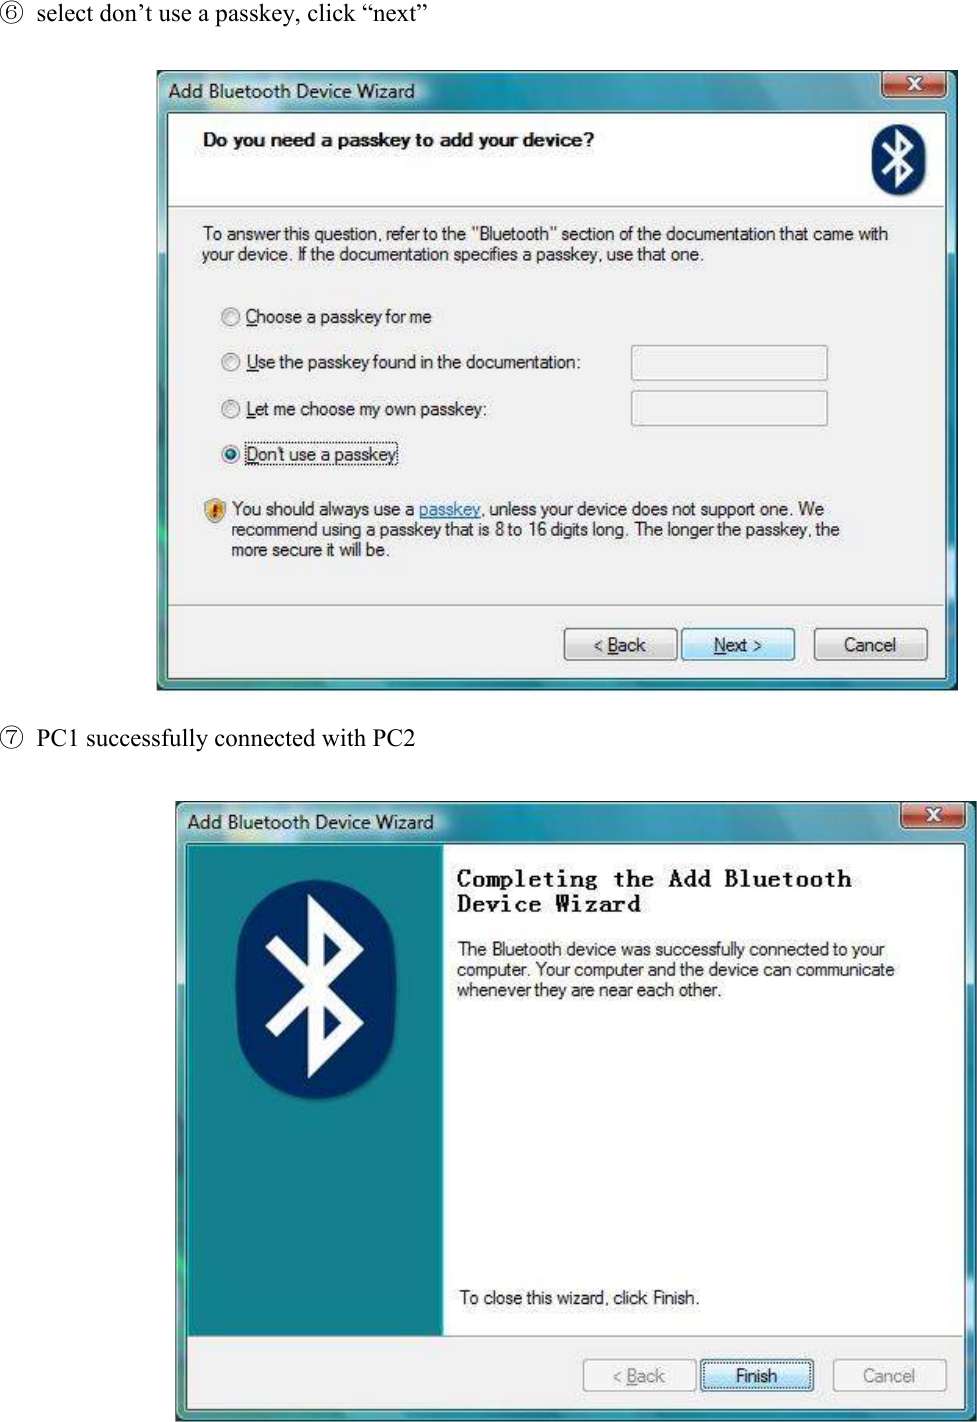  ⑥  select don’t use a passkey, click “next”                             ⑦  PC1 successfully connected with PC2                                  